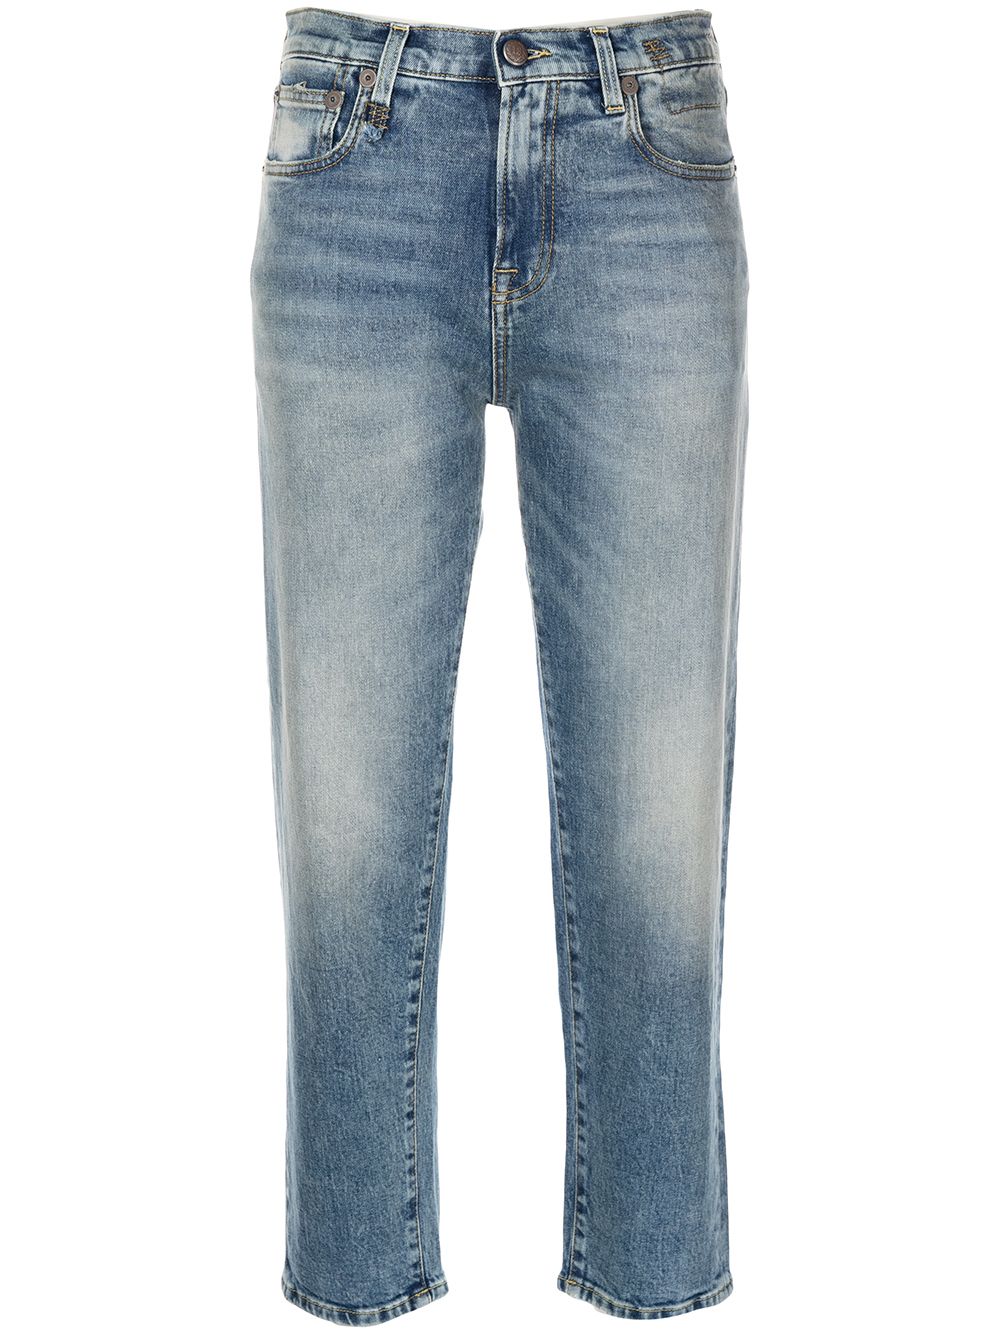 R13 high-waisted tapered jeans - Blue von R13